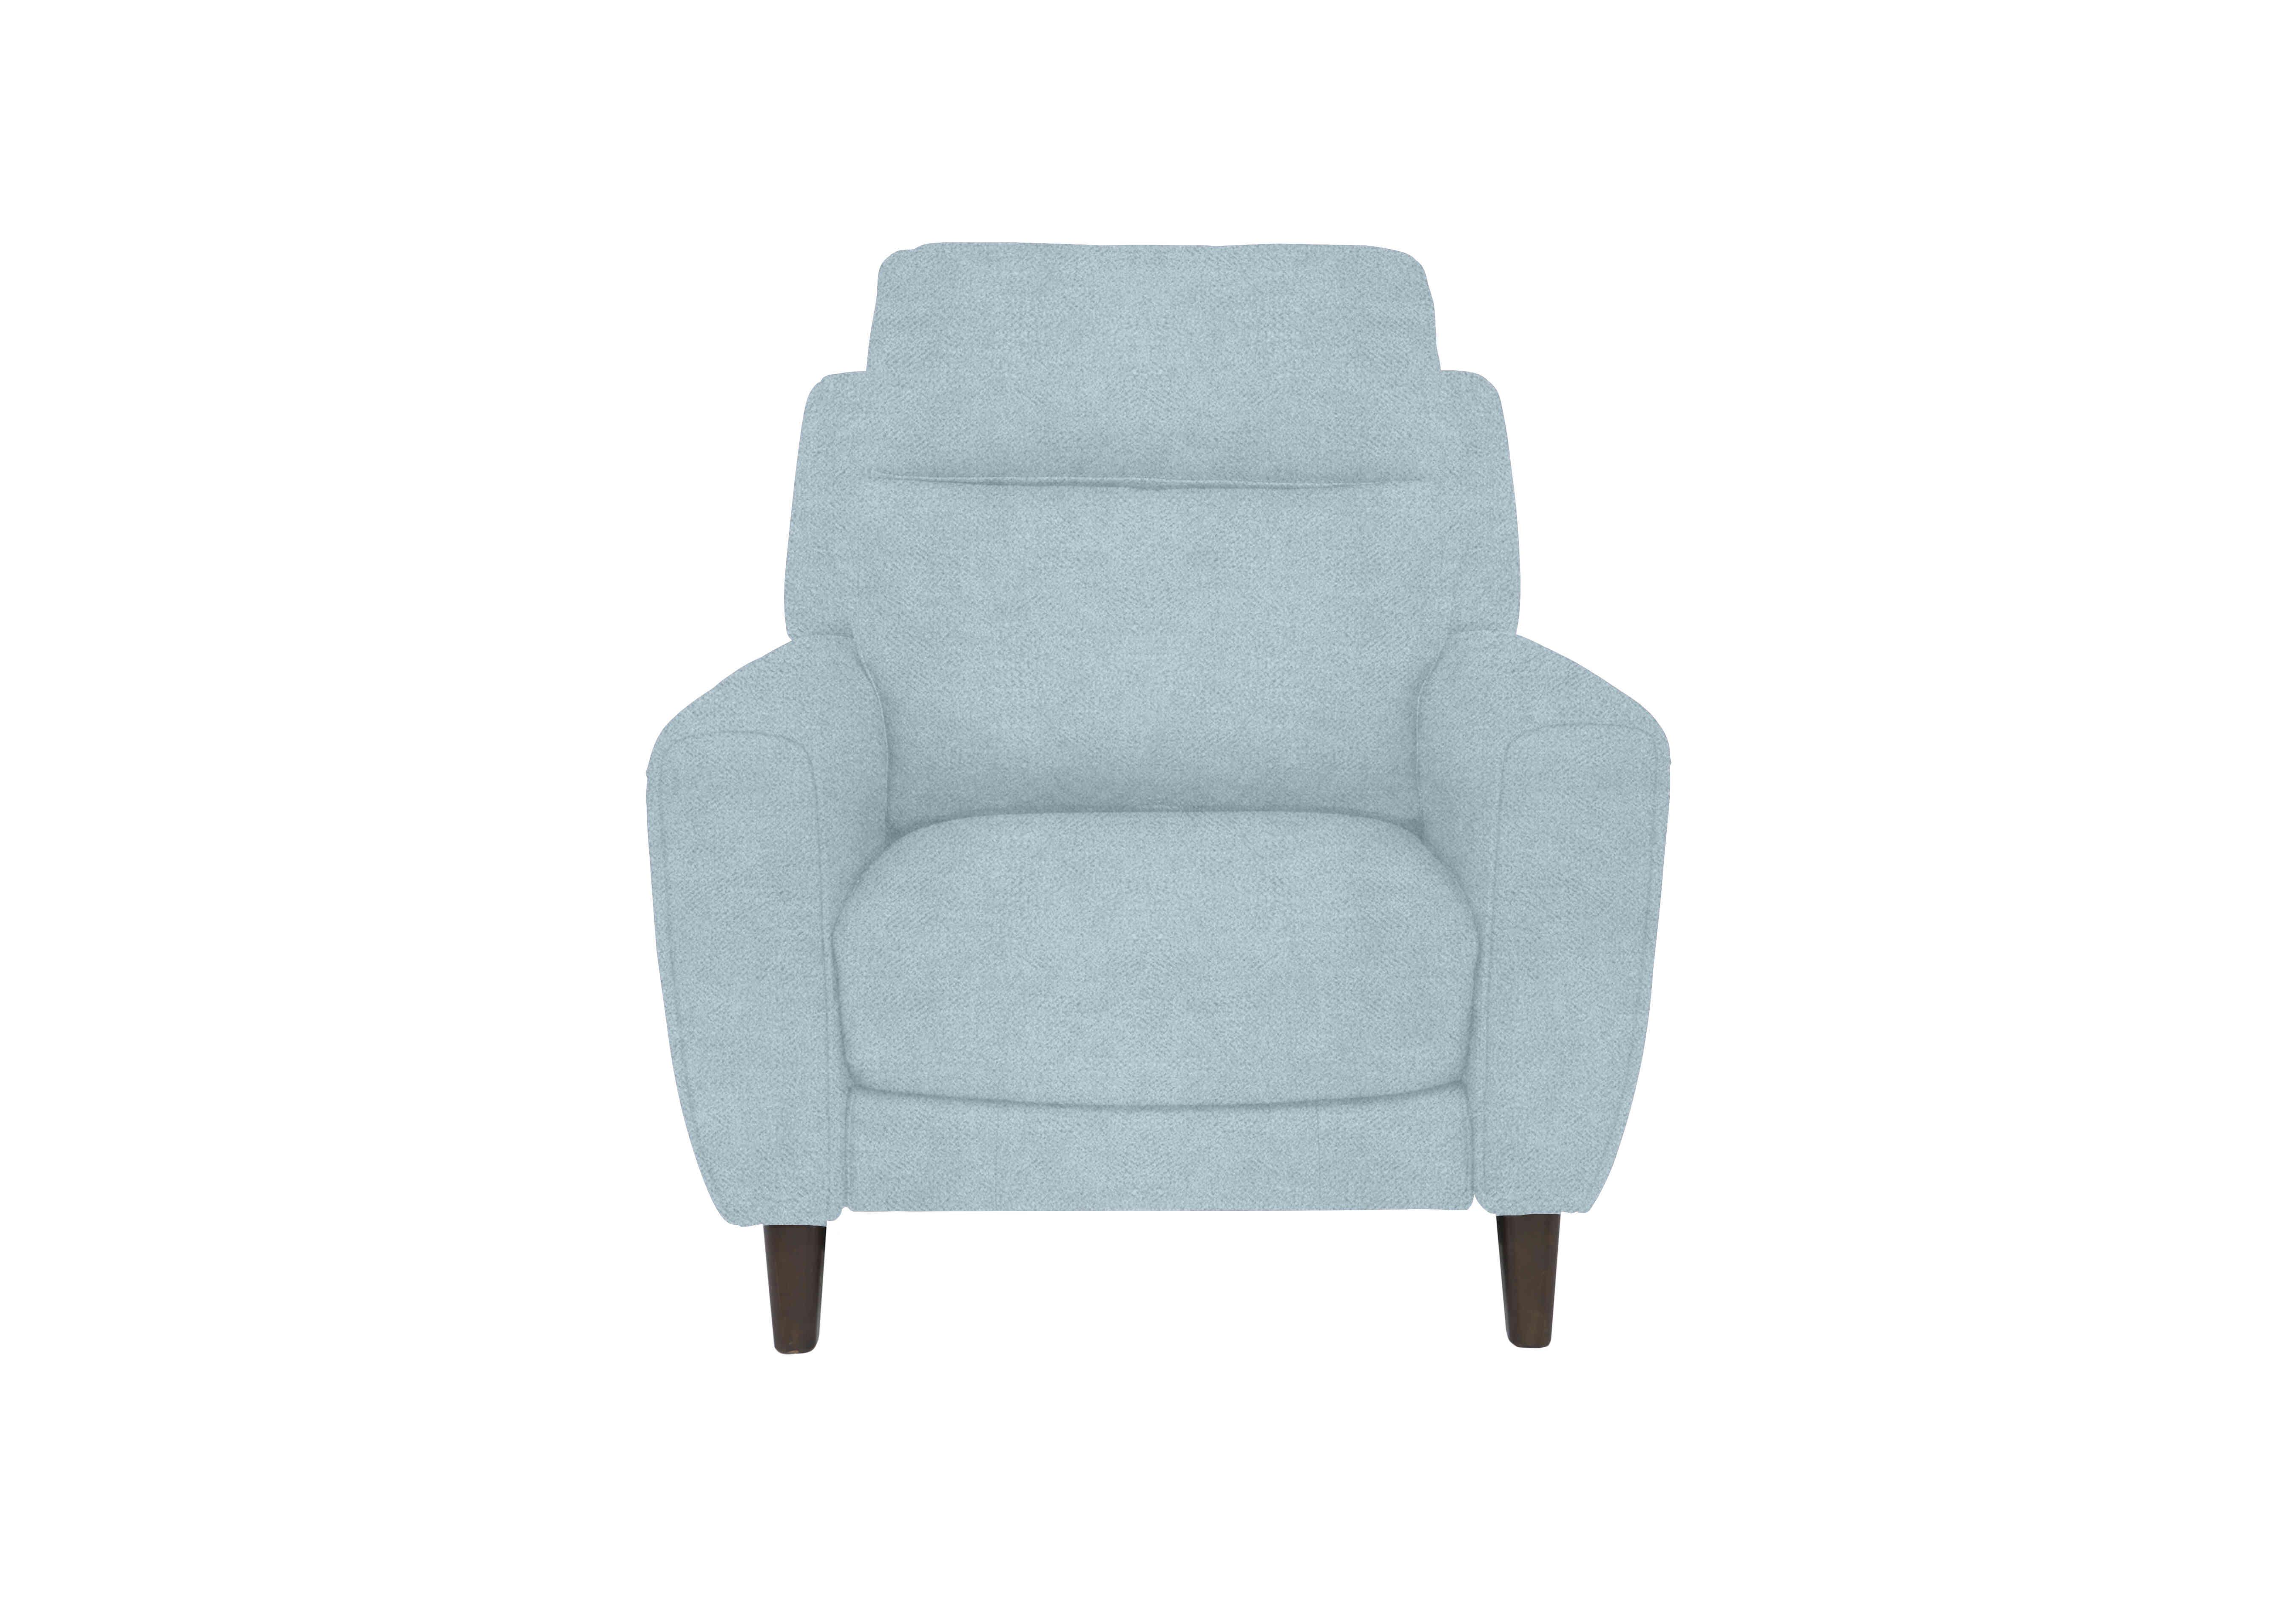 Zen Fabric Power Recliner Chair with Power Headrest in Fab-Meo-R17 Baby Blue on Furniture Village